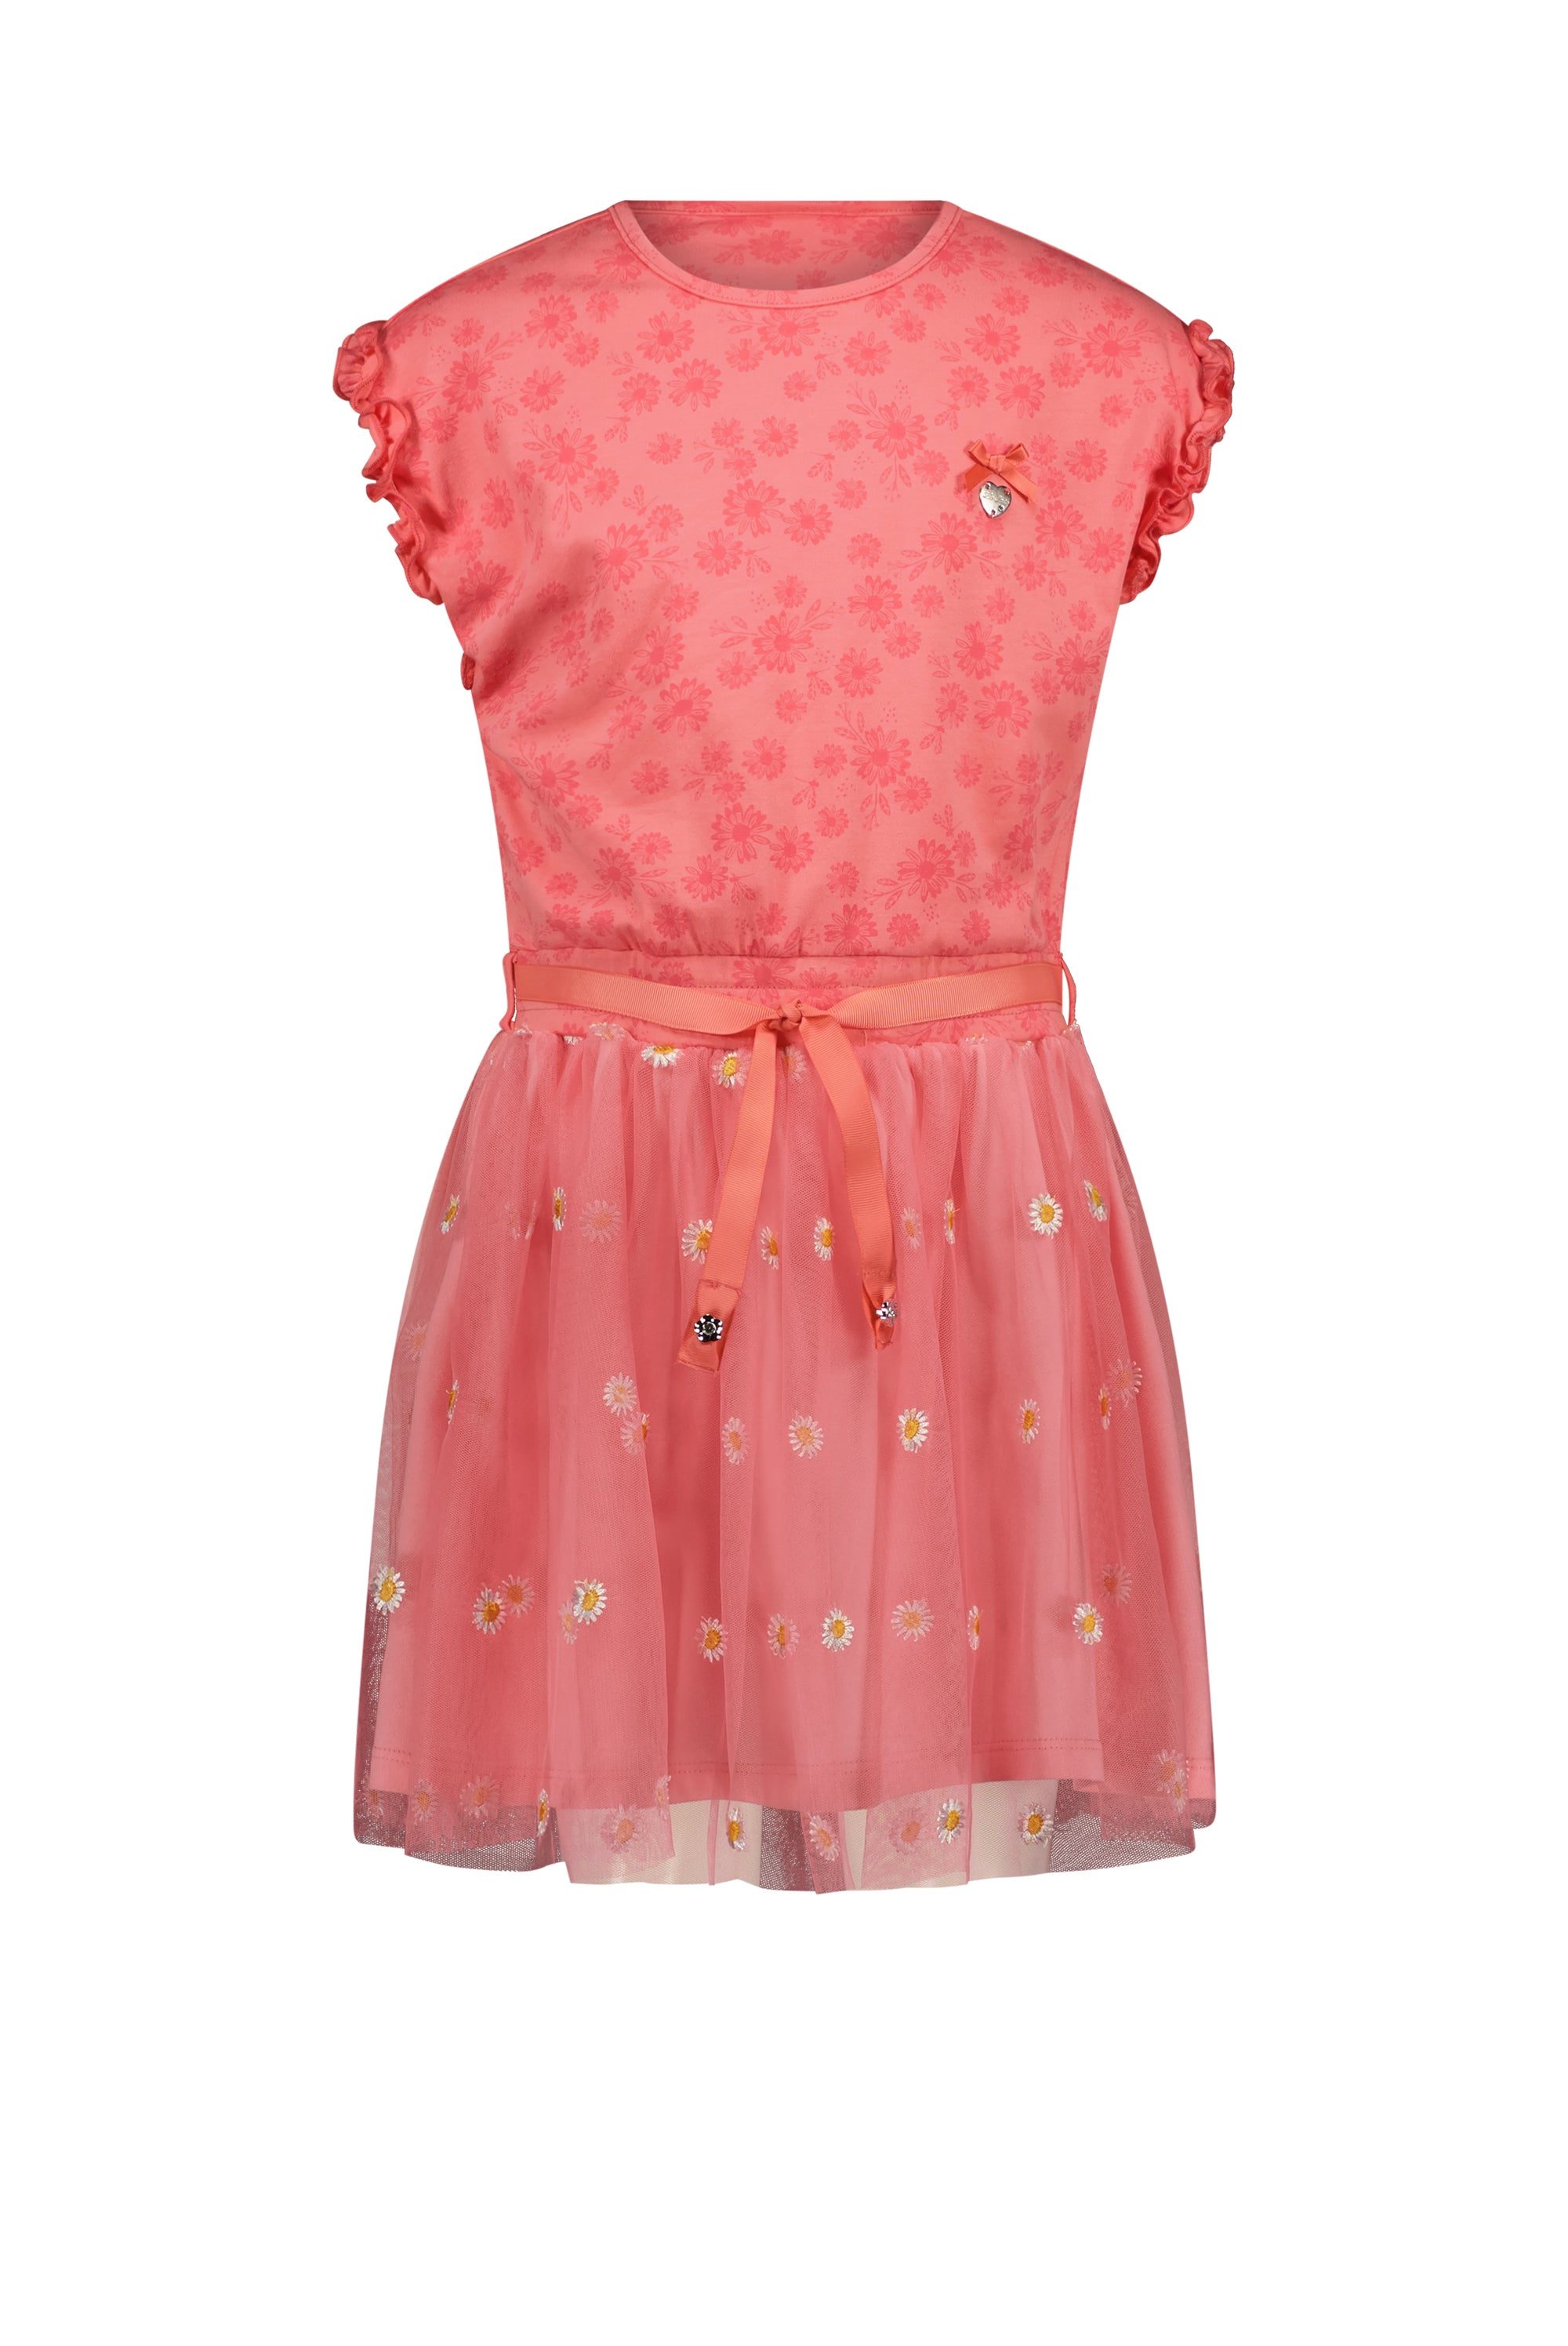 SQUID daisy embroidery dress